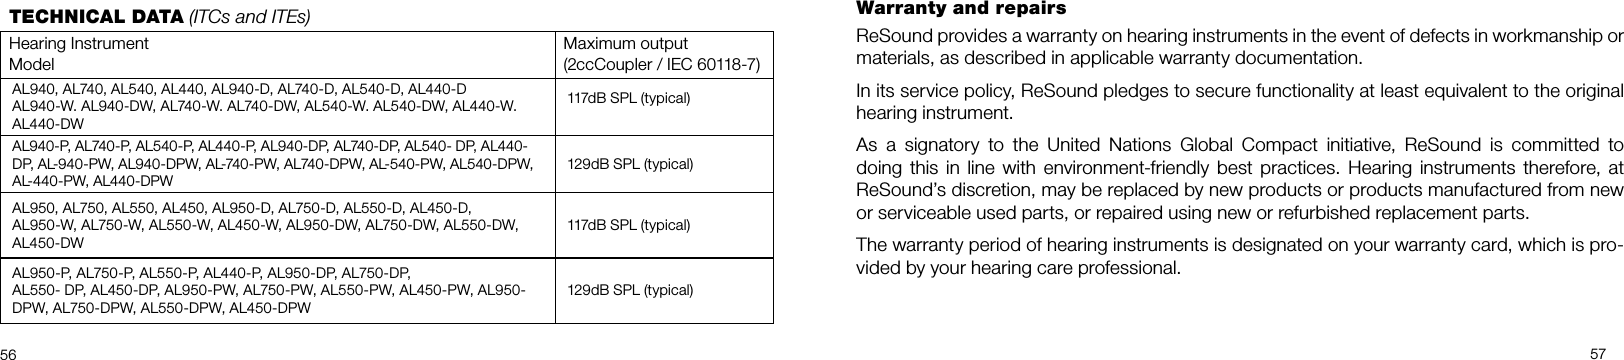 56 57Warranty and repairs ReSound provides a warranty on hearing instruments in the event of defects in workmanship or materials, as described in applicable warranty documentation.In its service policy, ReSound pledges to secure functionality at least equivalent to the original hearing instrument.As a signatory to the United Nations Global Compact initiative, ReSound is committed to  doing this in line with environment-friendly best practices. Hearing instruments therefore, at ReSound’s discretion, may be replaced by new products or products manufactured from new or serviceable used parts, or repaired using new or refurbished replacement parts.The warranty period of hearing instruments is designated on your warranty card, which is pro-vided by your hearing care professional.TECHNICAL DATA (ITCs and ITEs)Hearing Instrument ModelMaximum output (2ccCoupler / IEC 60118-7)AL940, AL740, AL540, AL440, AL940-D, AL740-D, AL540-D, AL440-DAL940-W. AL940-DW, AL740-W. AL740-DW, AL540-W. AL540-DW, AL440-W. AL440-DW117dB SPL (typical)AL940-P, AL740-P, AL540-P, AL440-P, AL940-DP, AL740-DP, AL540- DP, AL440-DP, AL-940-PW, AL940-DPW, AL-740-PW, AL740-DPW, AL-540-PW, AL540-DPW, AL-440-PW, AL440-DPW129dB SPL (typical)AL950, AL750, AL550, AL450, AL950-D, AL750-D, AL550-D, AL450-D,AL950-W, AL750-W, AL550-W, AL450-W, AL950-DW, AL750-DW, AL550-DW, AL450-DW117dB SPL (typical) AL950-P, AL750-P, AL550-P, AL440-P, AL950-DP, AL750-DP, AL550- DP, AL450-DP, AL950-PW, AL750-PW, AL550-PW, AL450-PW, AL950-DPW, AL750-DPW, AL550-DPW, AL450-DPW129dB SPL (typical)